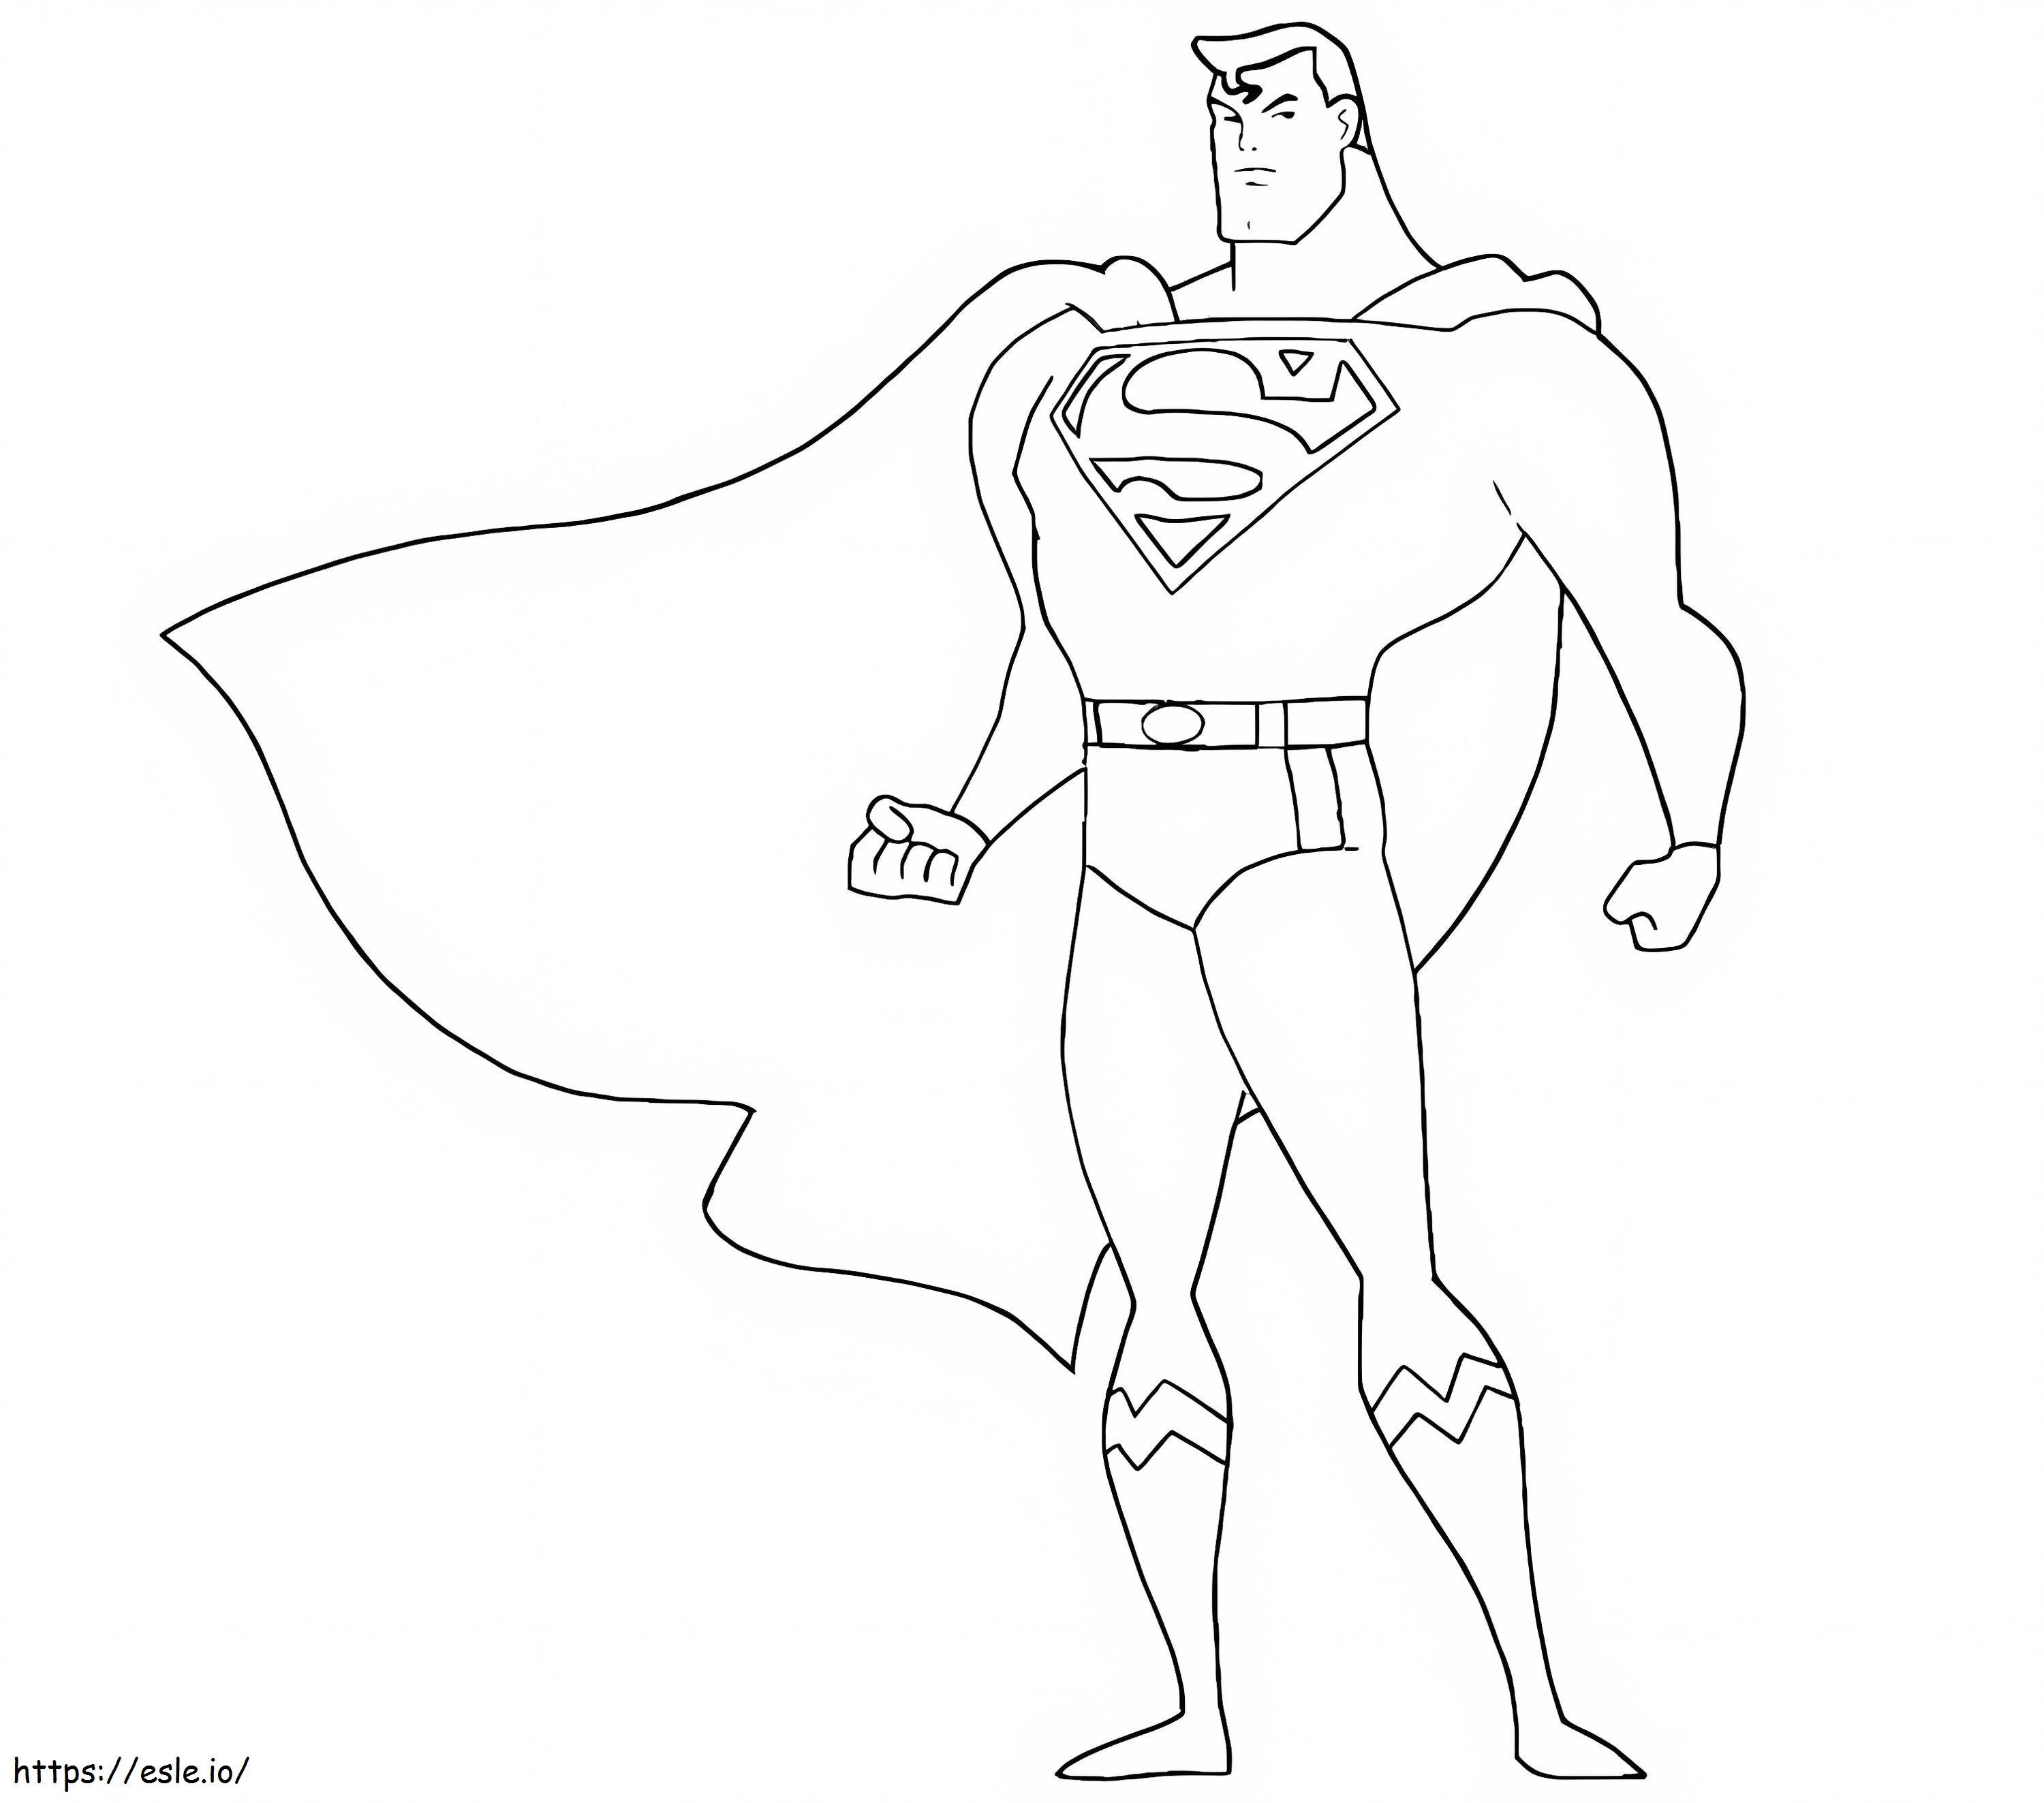 Normal Superman coloring page